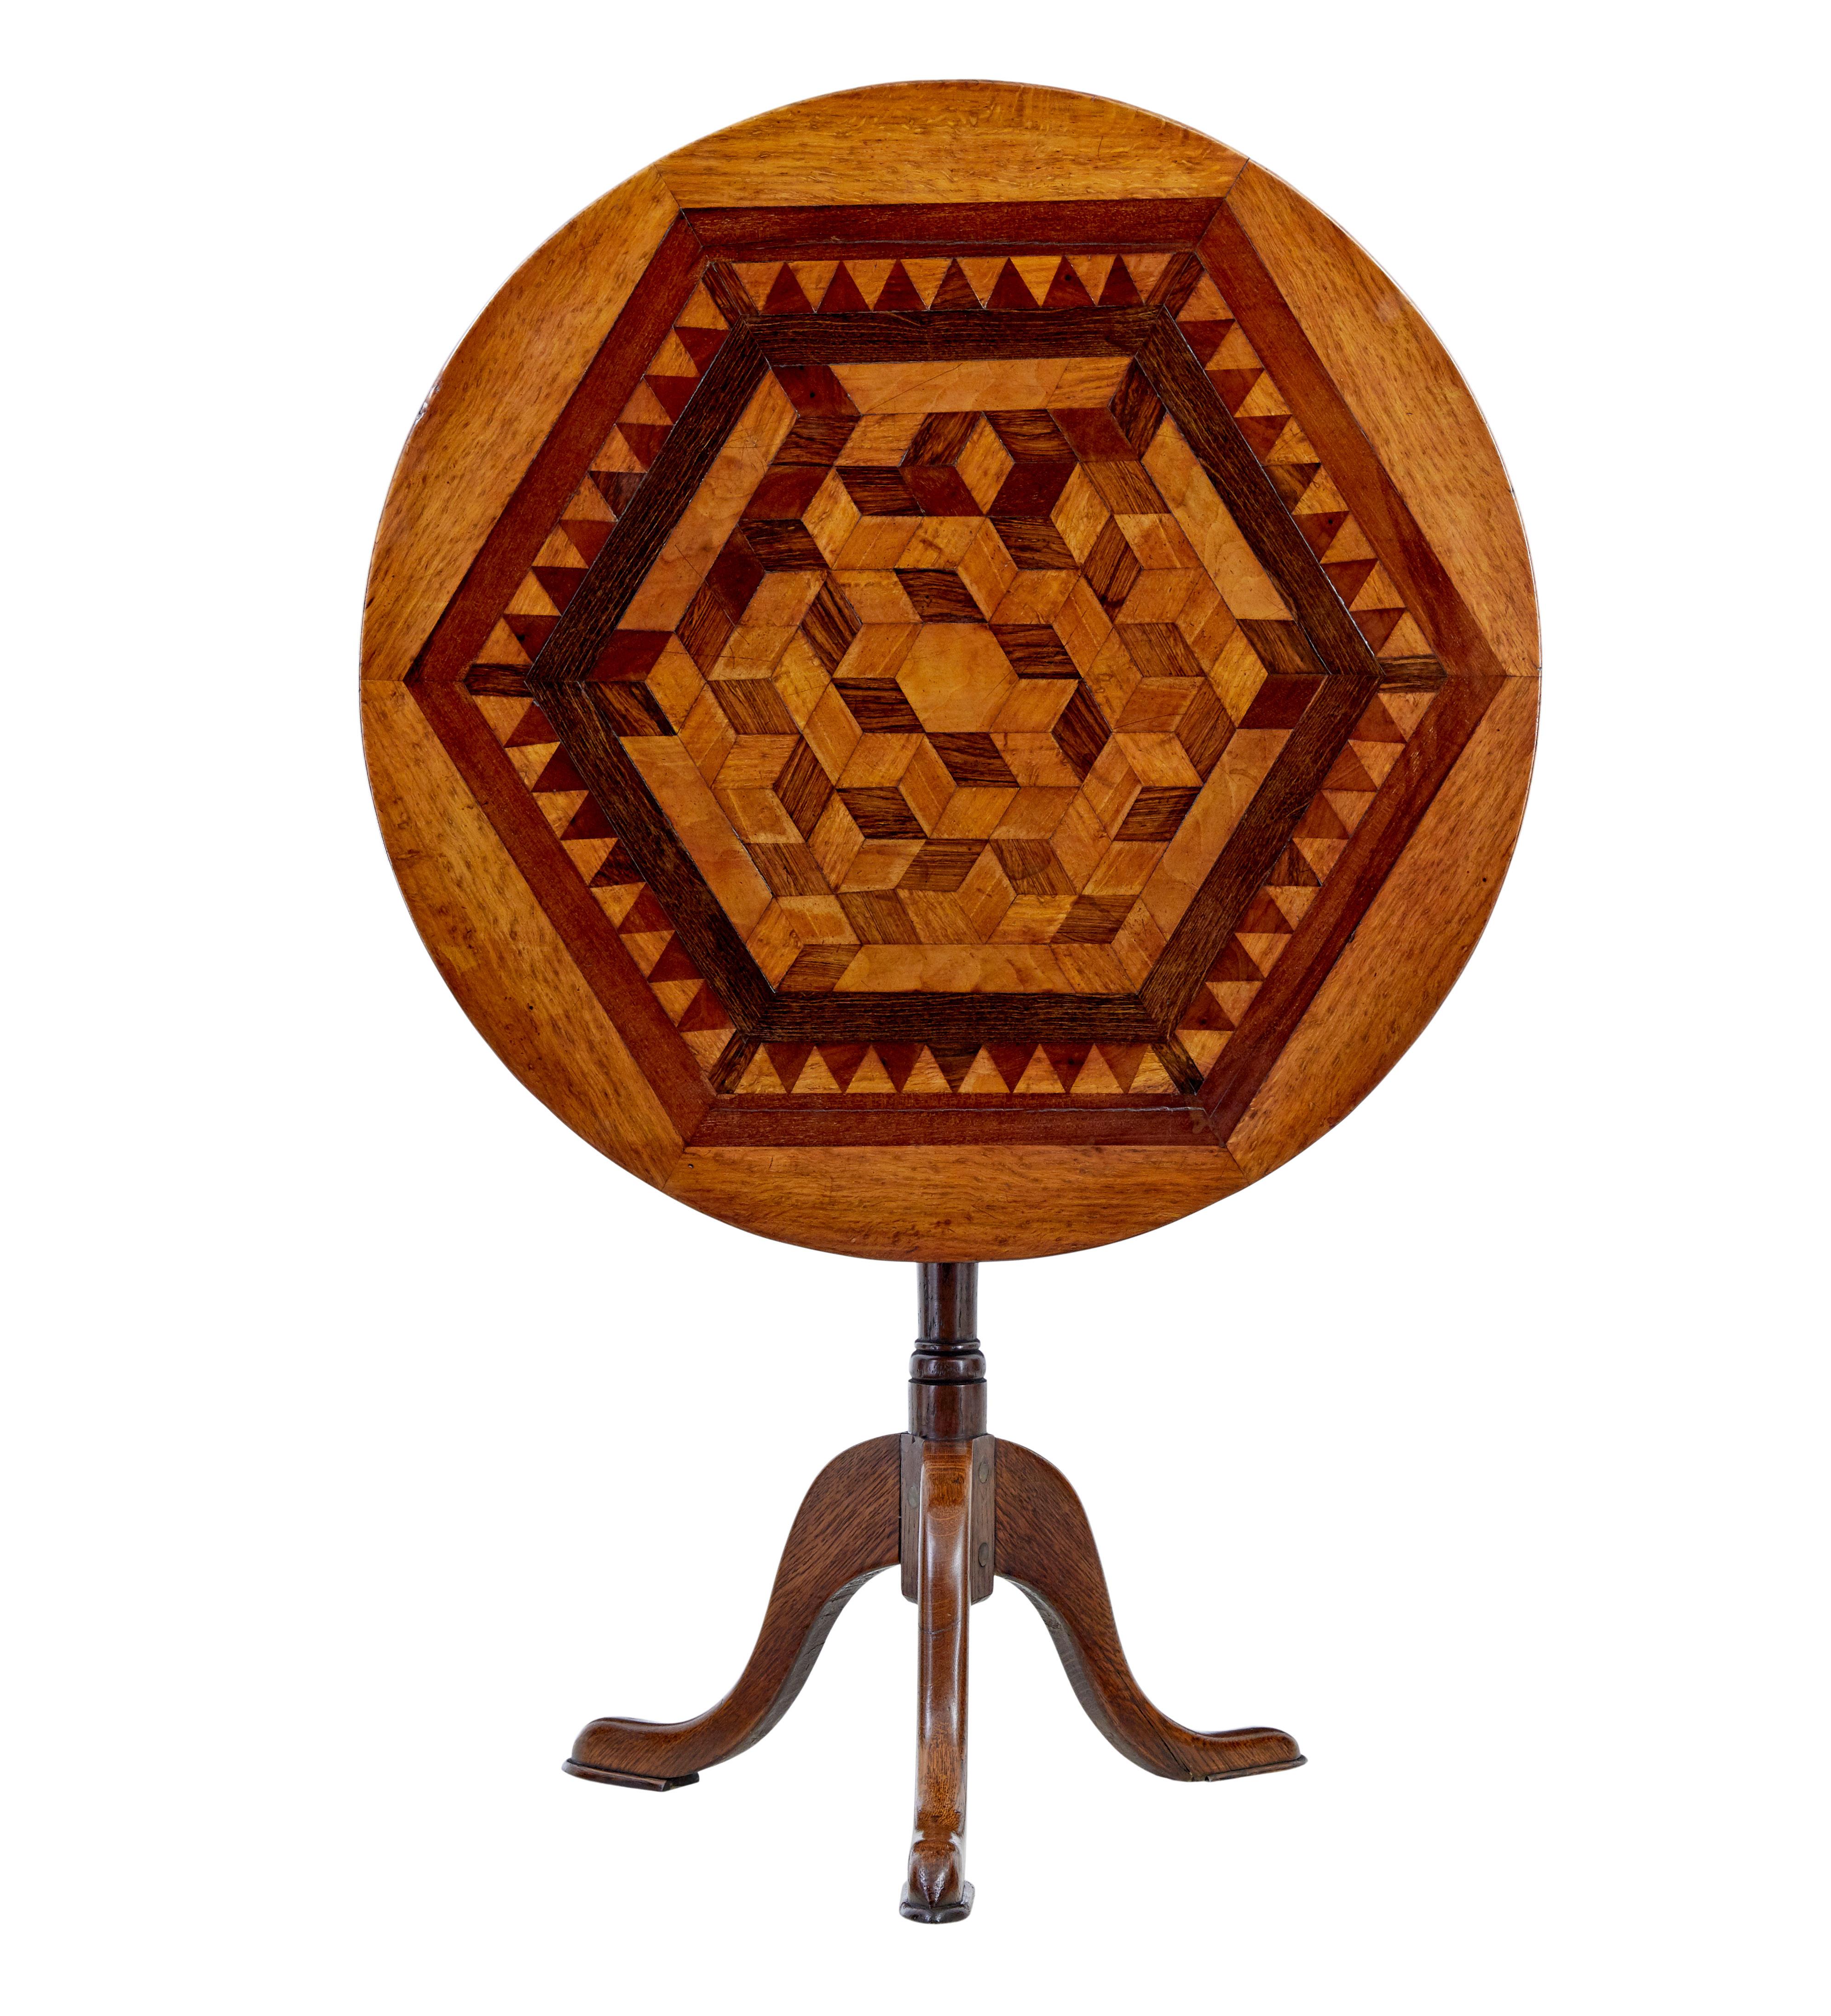 19th century inlaid oak round occasional table circa 1880.

Good quality round tilt top table, ideal for many uses around the home.

Circular top inlaid with a geometric pattern, featuring exotic woods such as walnut and tulp.  Raised on a turned